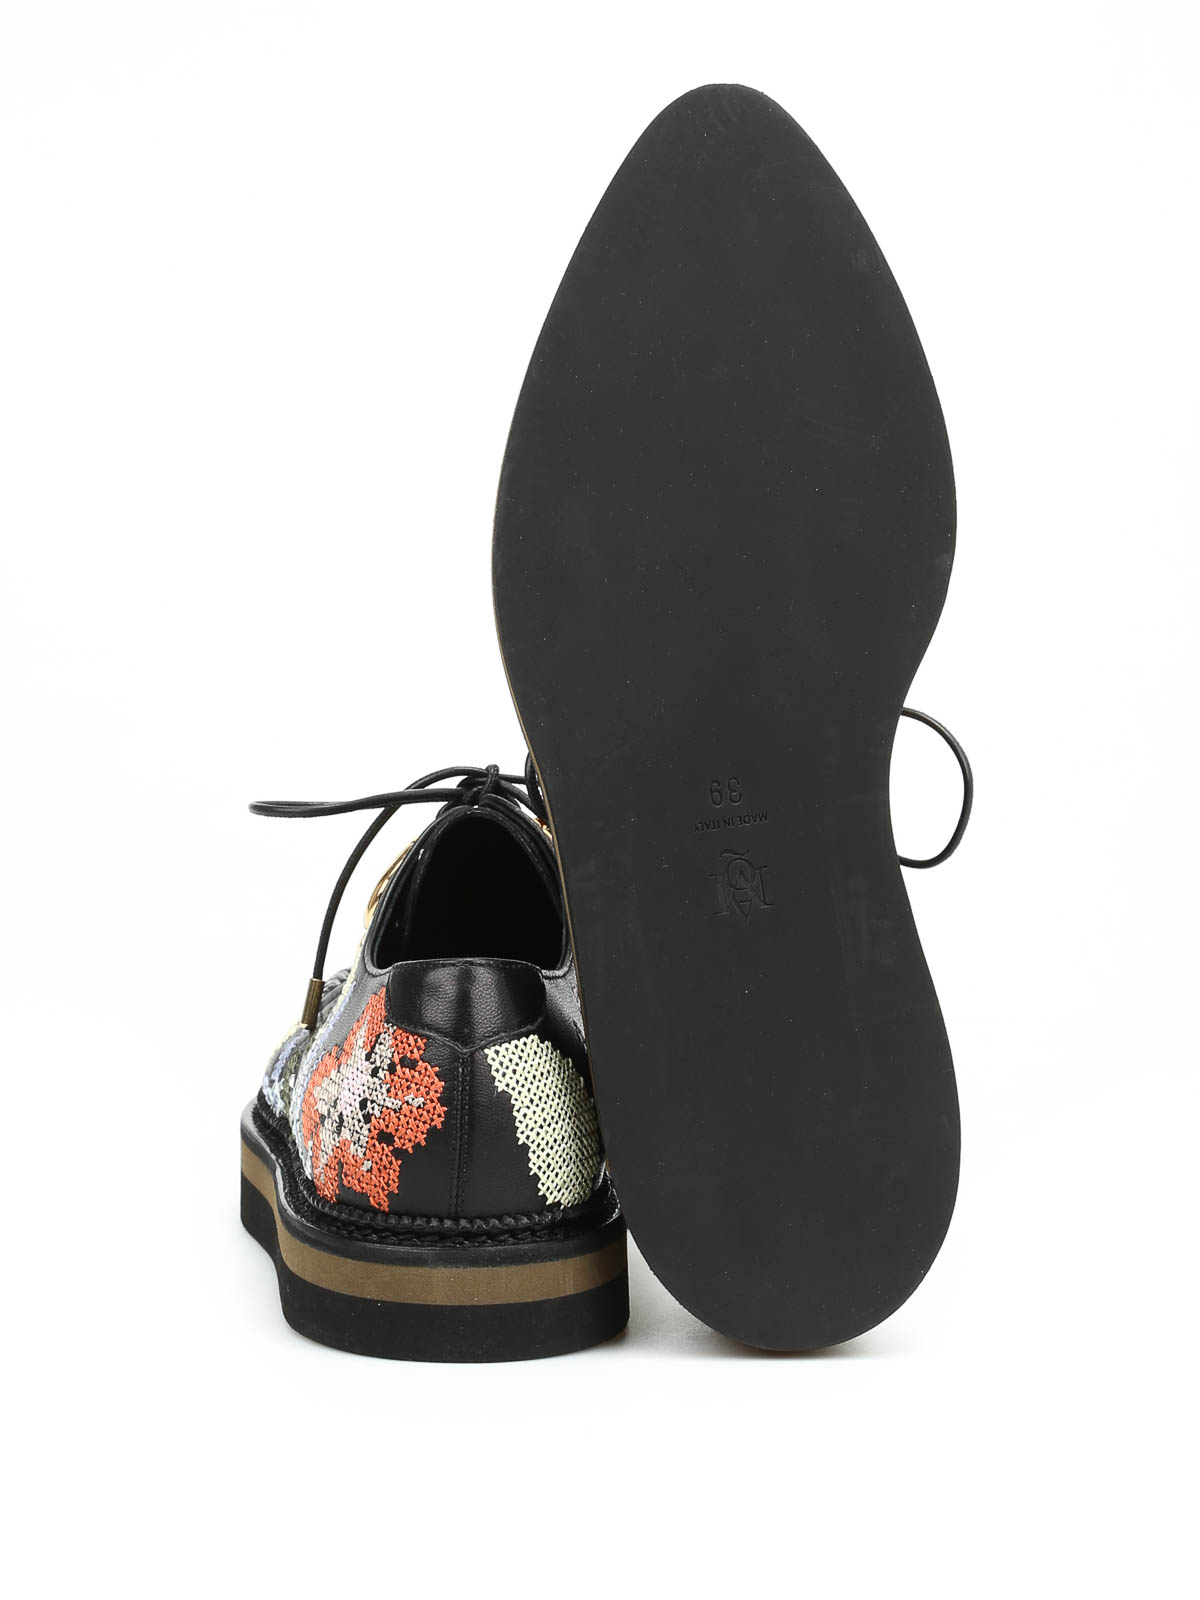 Lace-ups shoes Alexander Mcqueen - Nappa embroidered - 417148WHJI81049